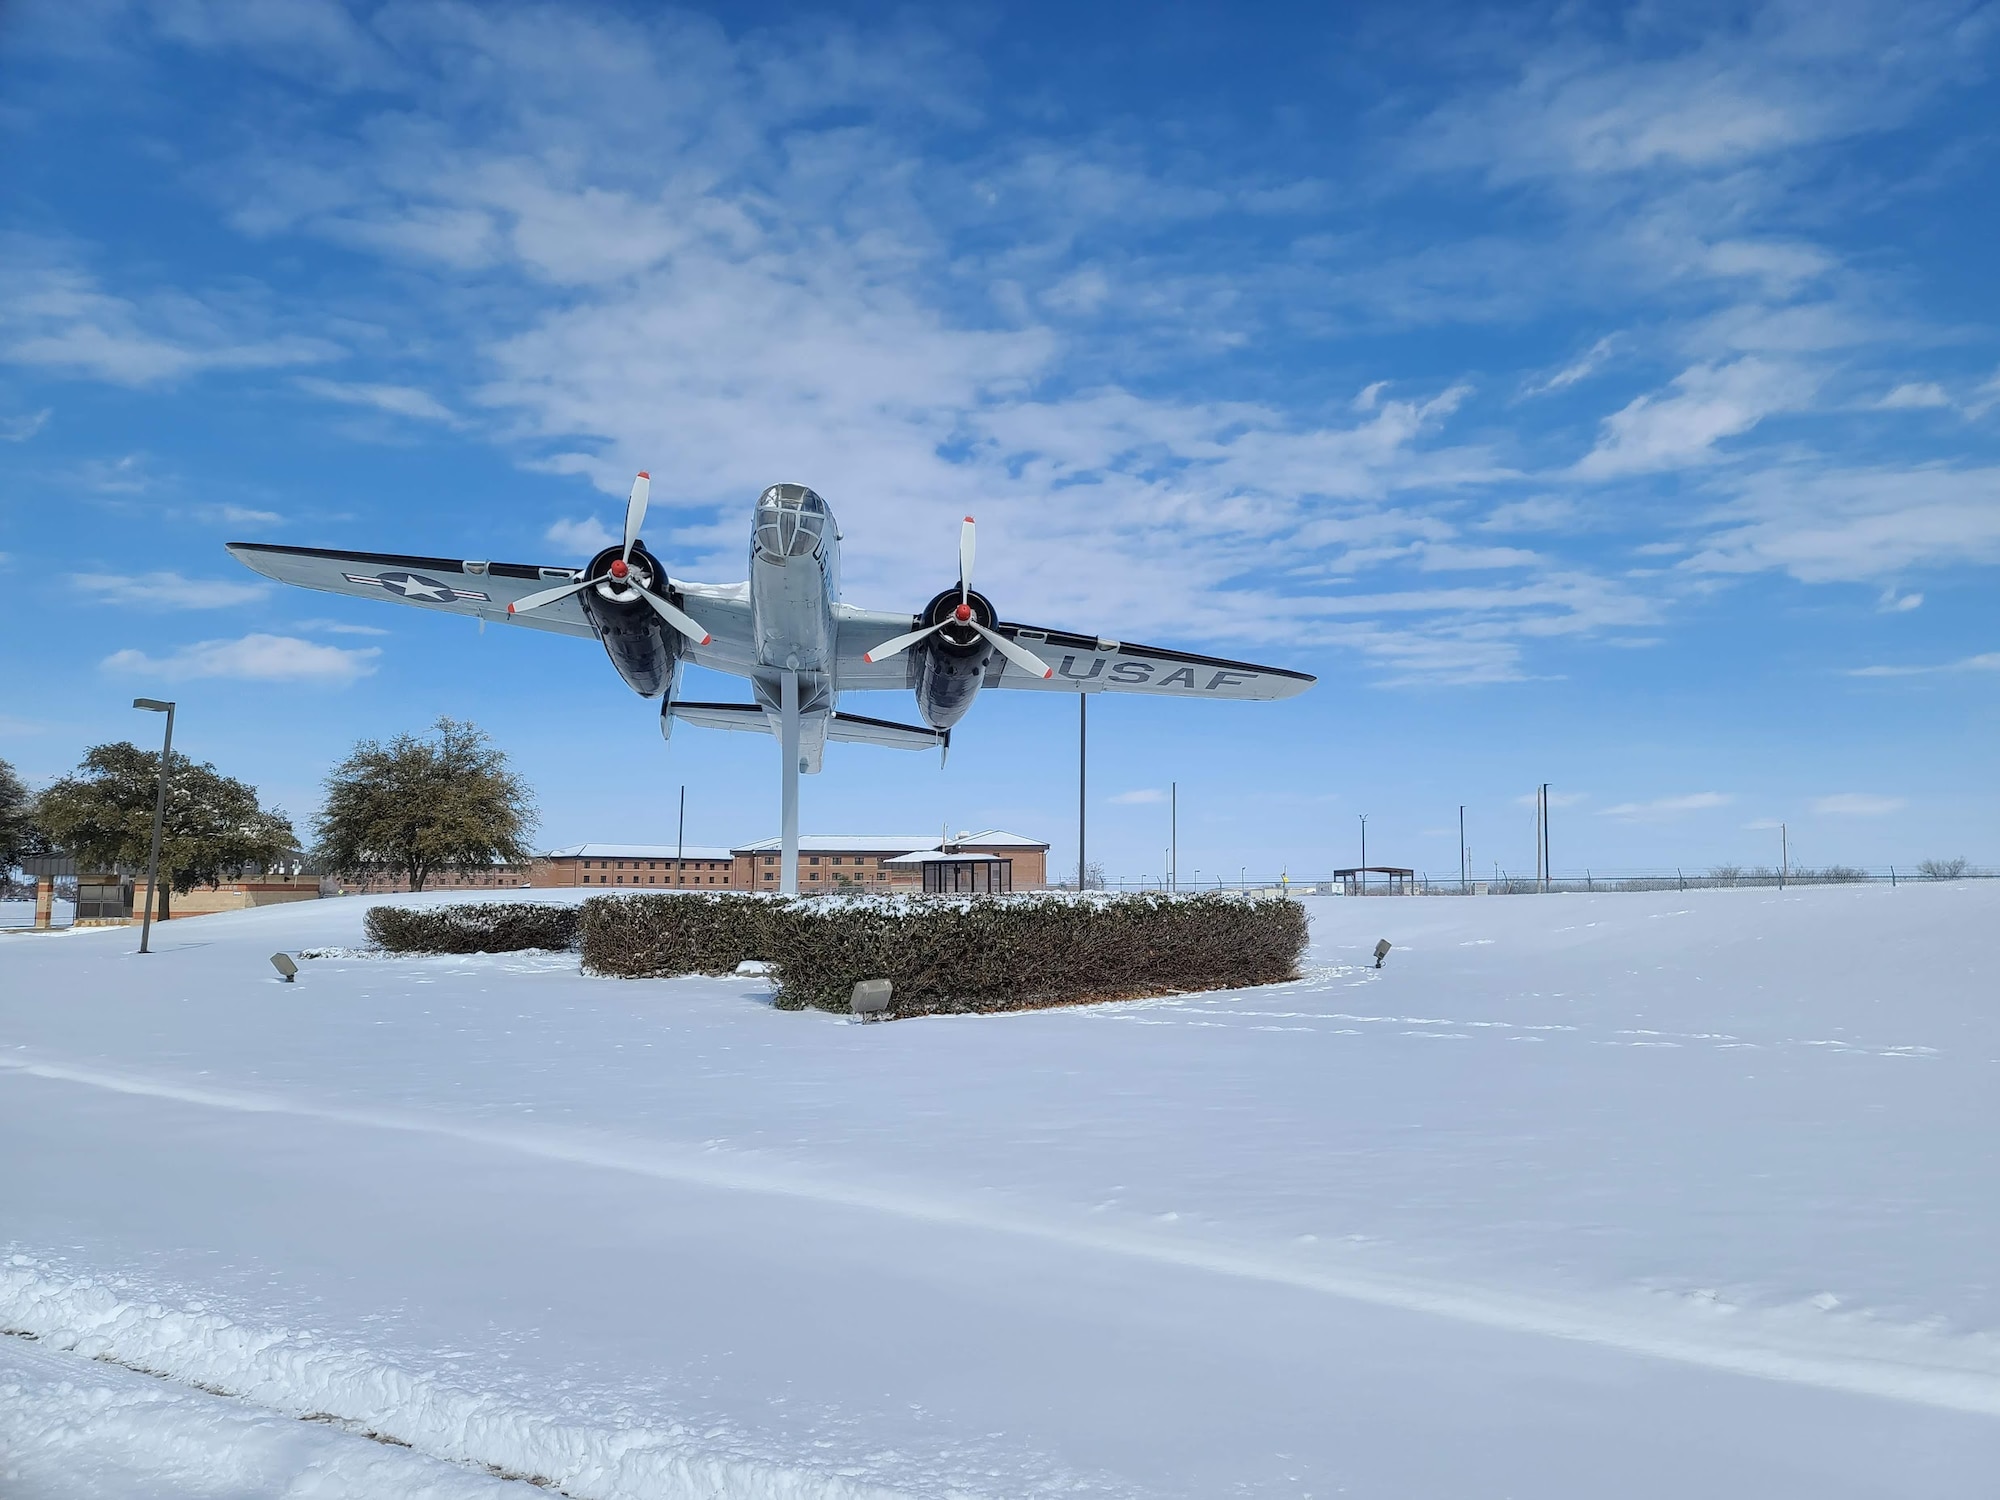 The approach in front of the Jacobson Gate to Goodfellow Air Force Base, Texas, covered in snow, Feb. 15, 2021. The base experienced freezing temperatures and heavy snowfalls in a record-breaking multi-weather phenomenon. (U.S. Air Force photo by Airman 1st Class Michael Bowman)